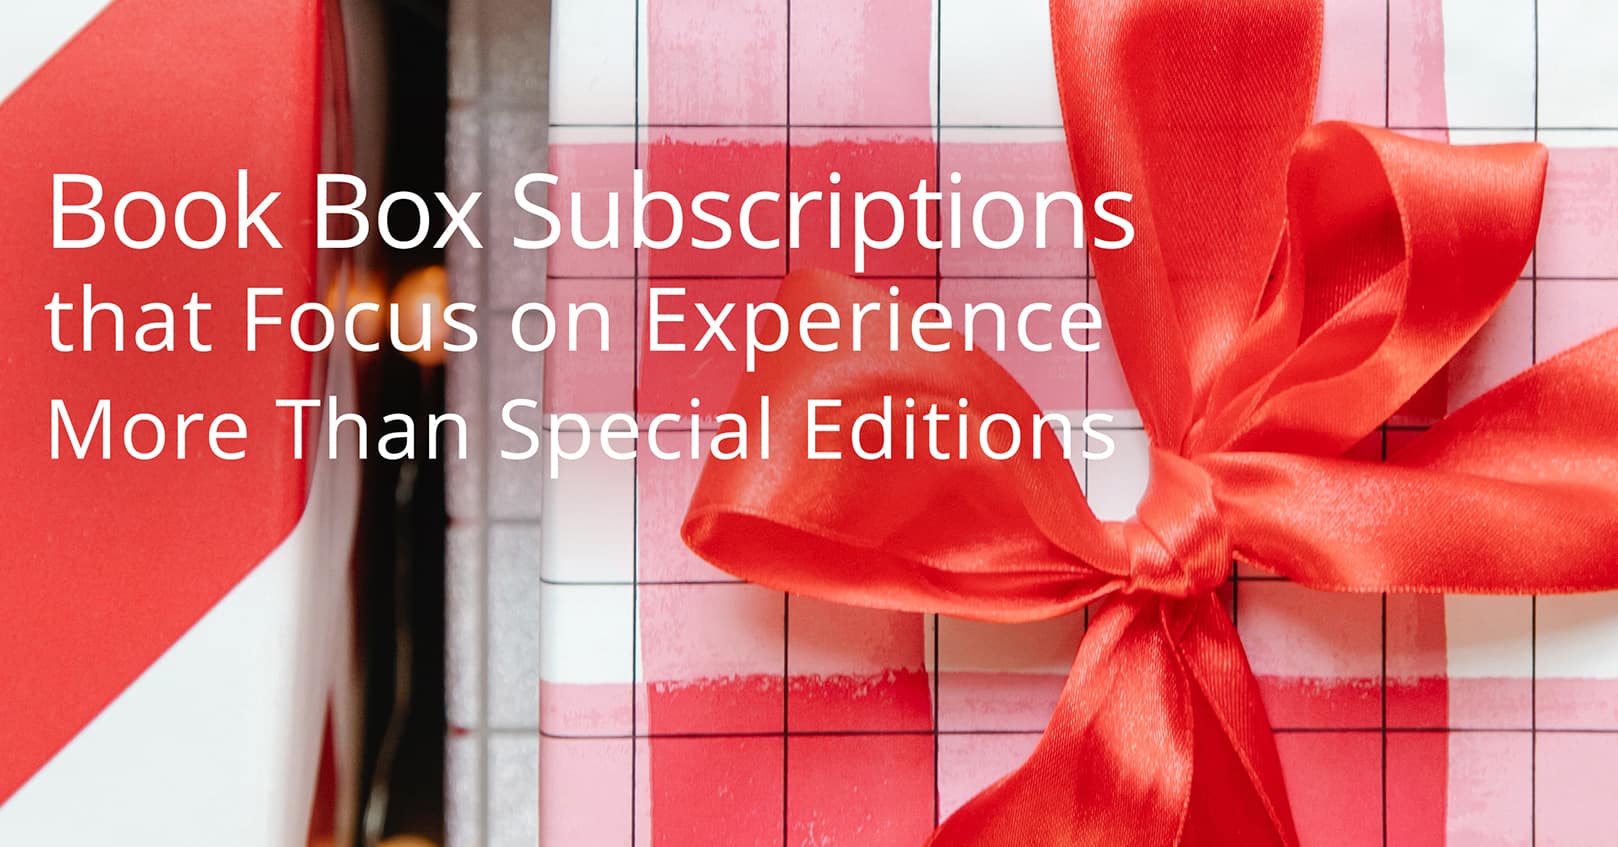 Book Box Subscriptions Focus on Experience